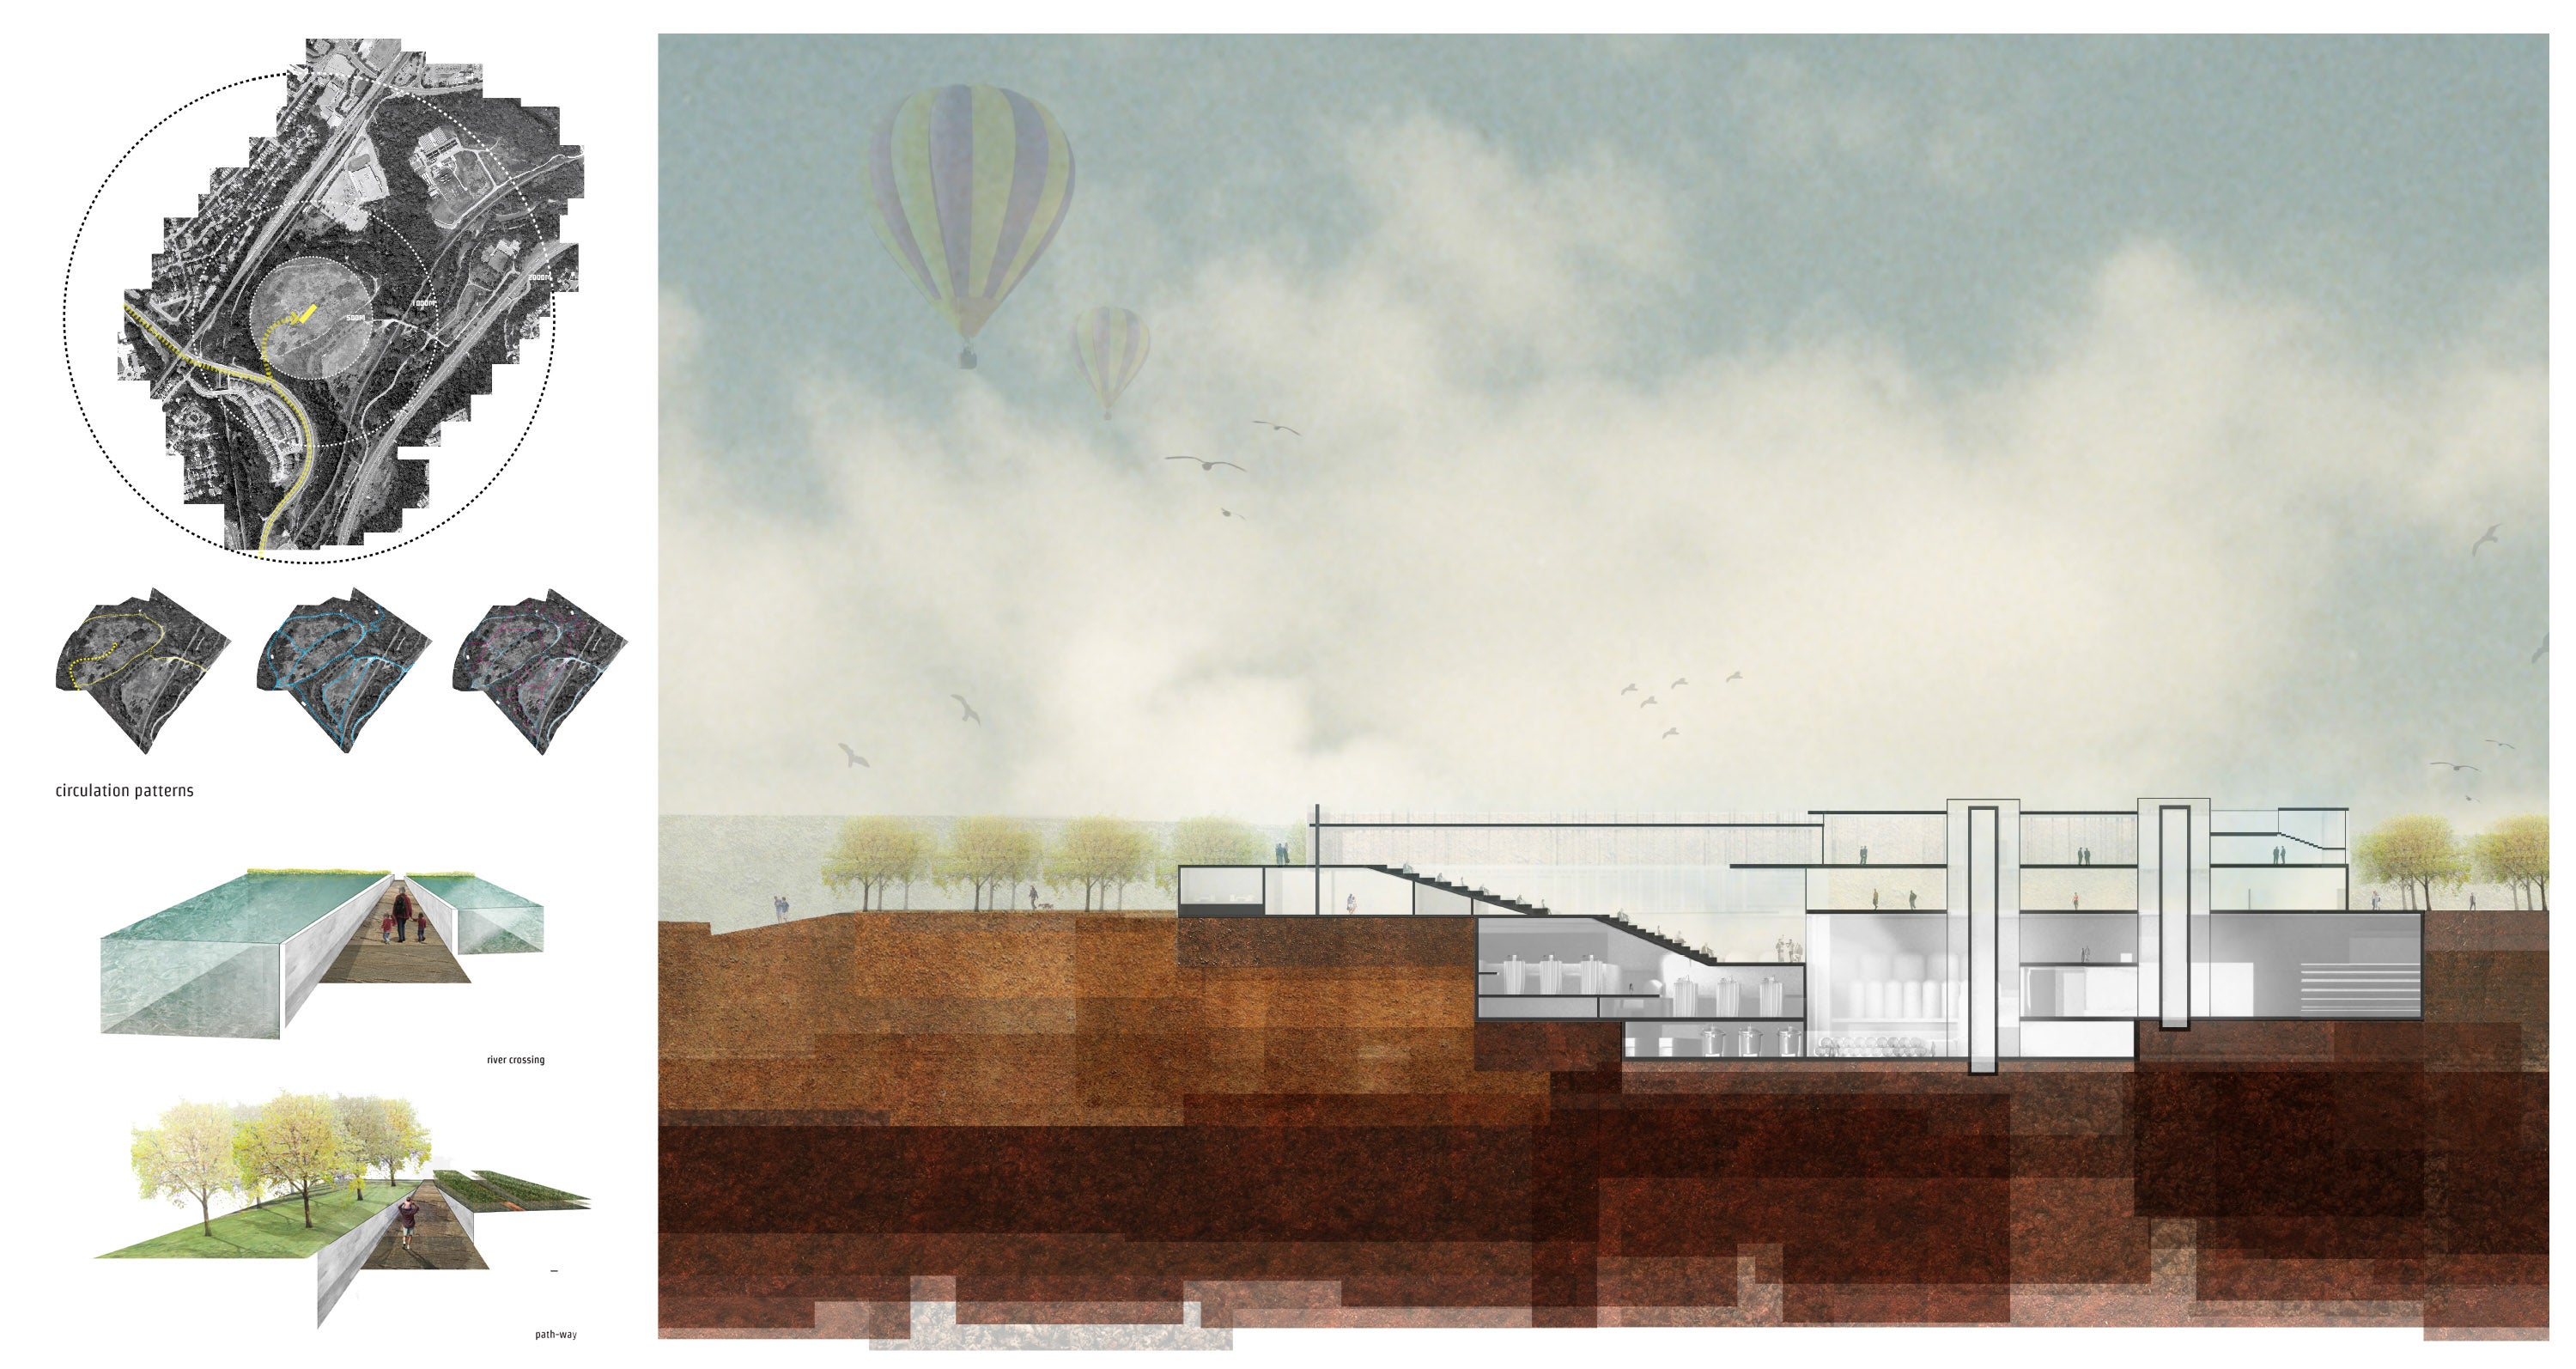 A presentation panel showcasing a textured sectional drawing of the building design, as well as a site plan diagram.